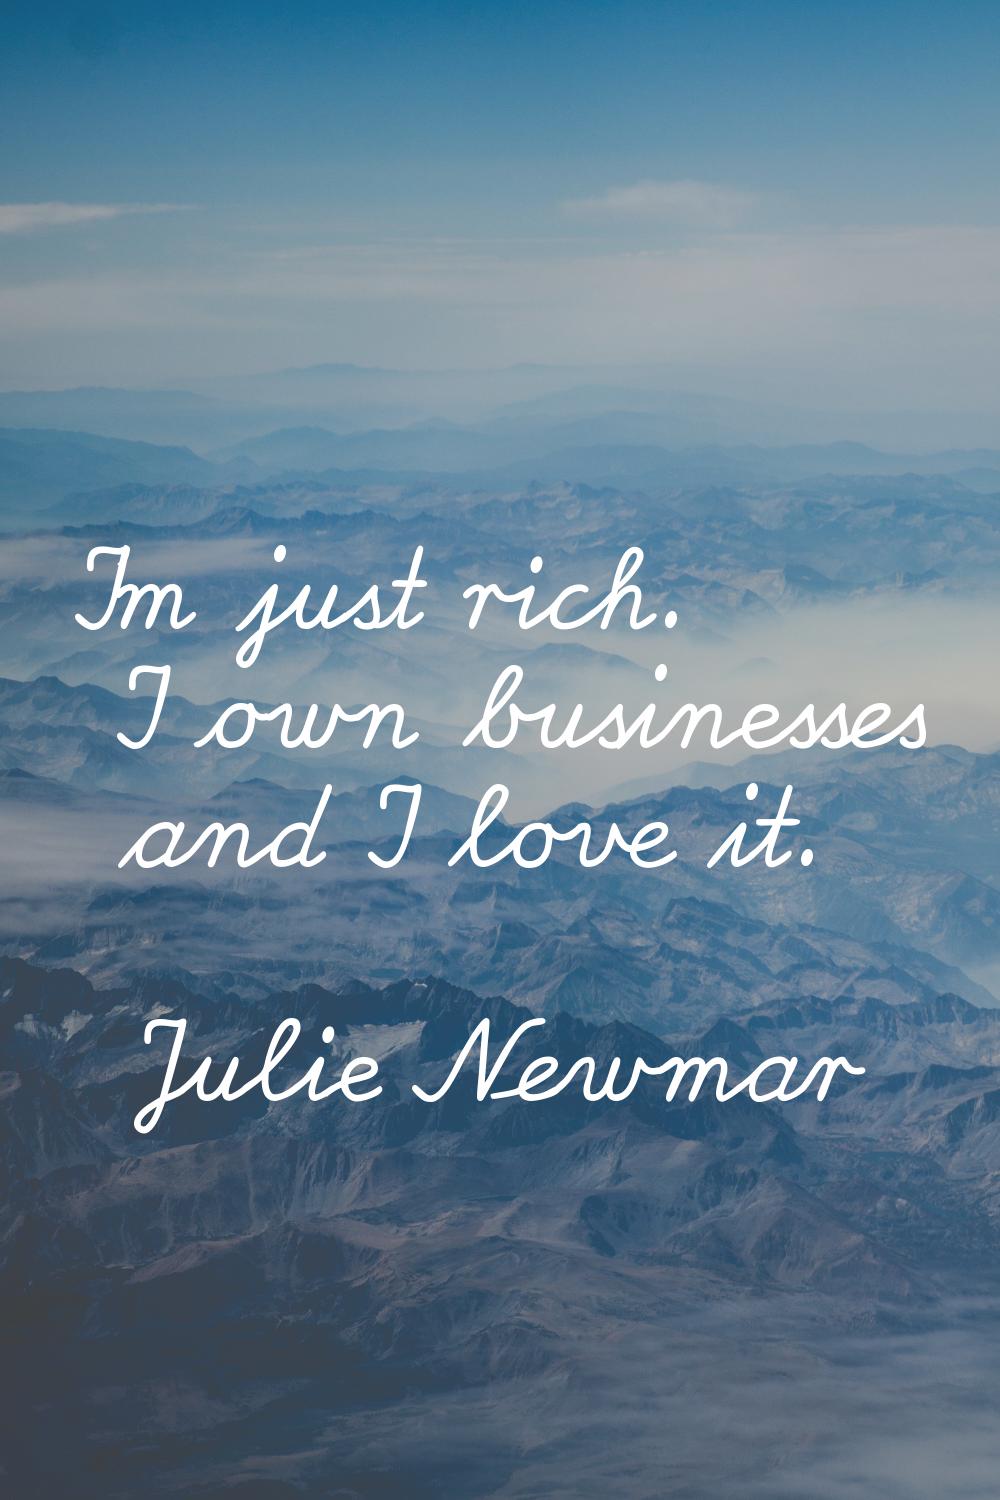 I'm just rich. I own businesses and I love it.